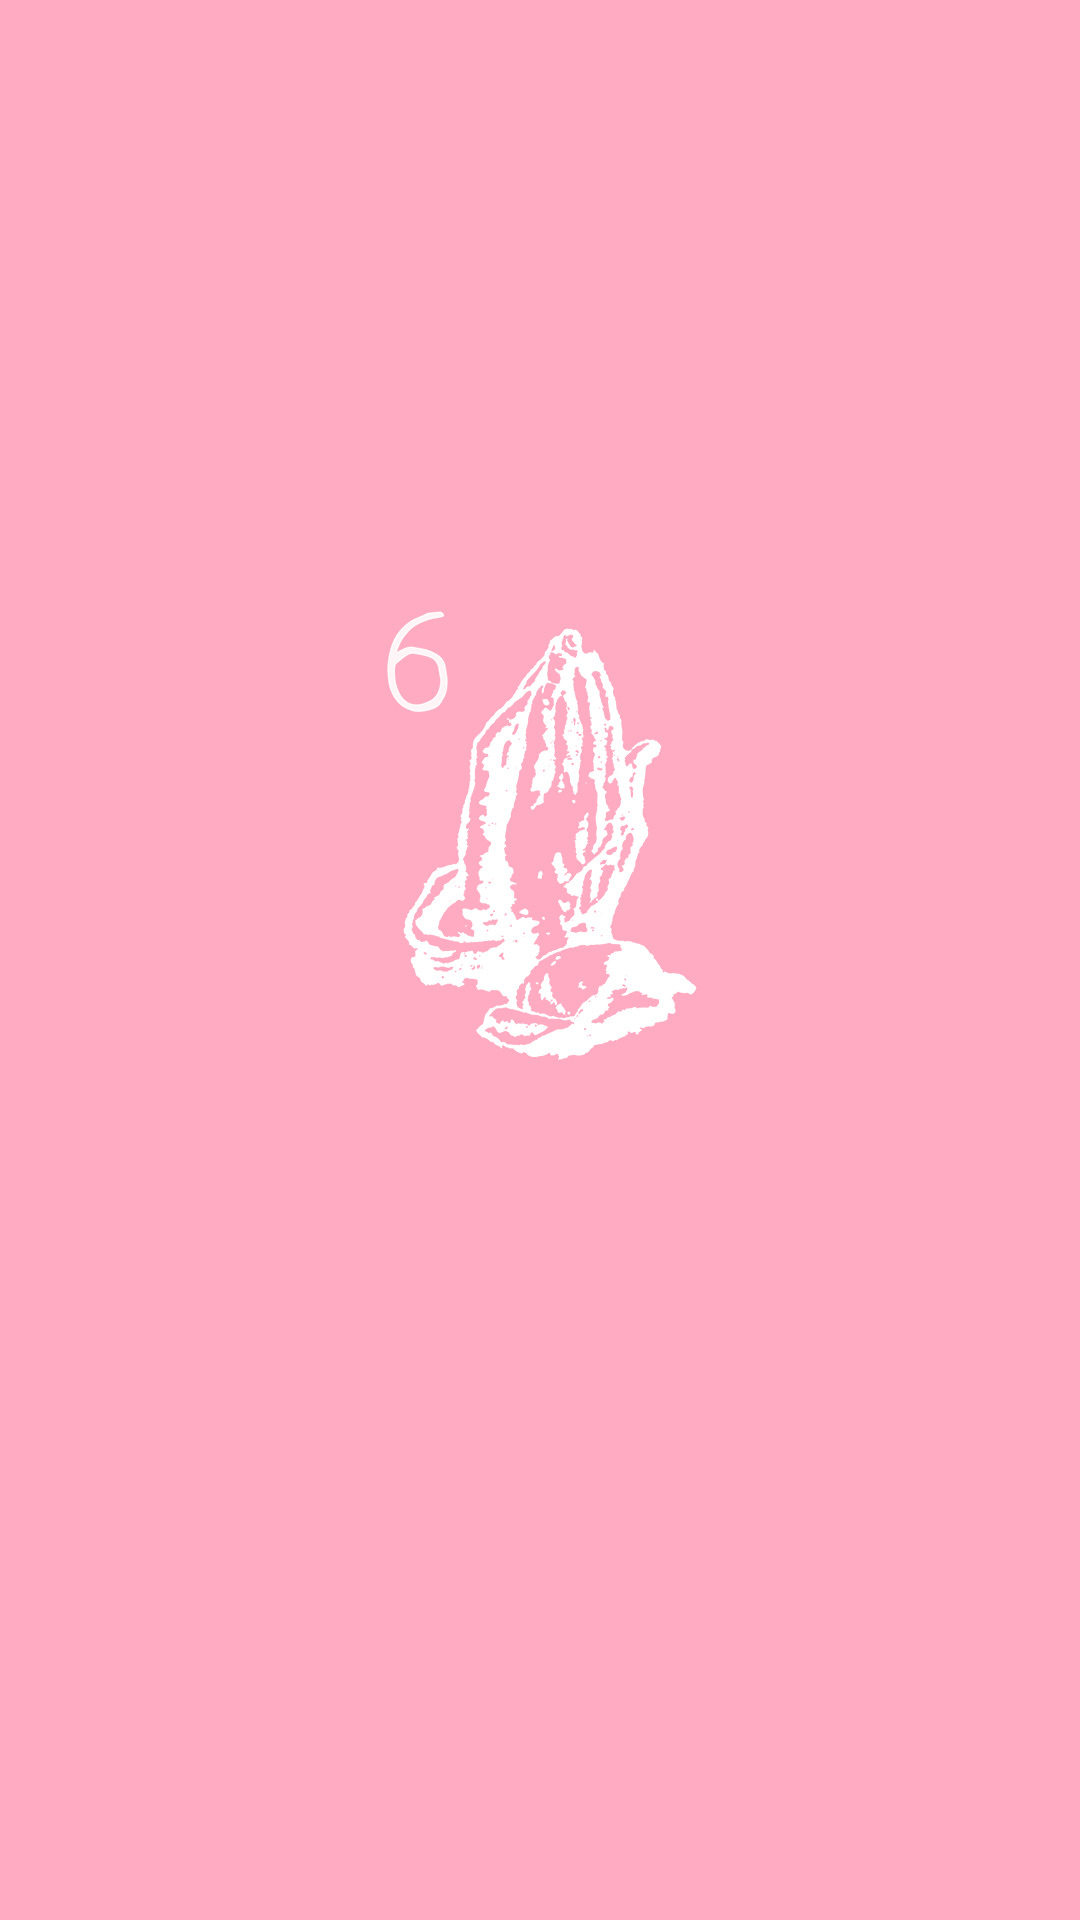 THE AESTHENTIC — Drake OVO SOUND, 6 God and OVO Wallpapers.